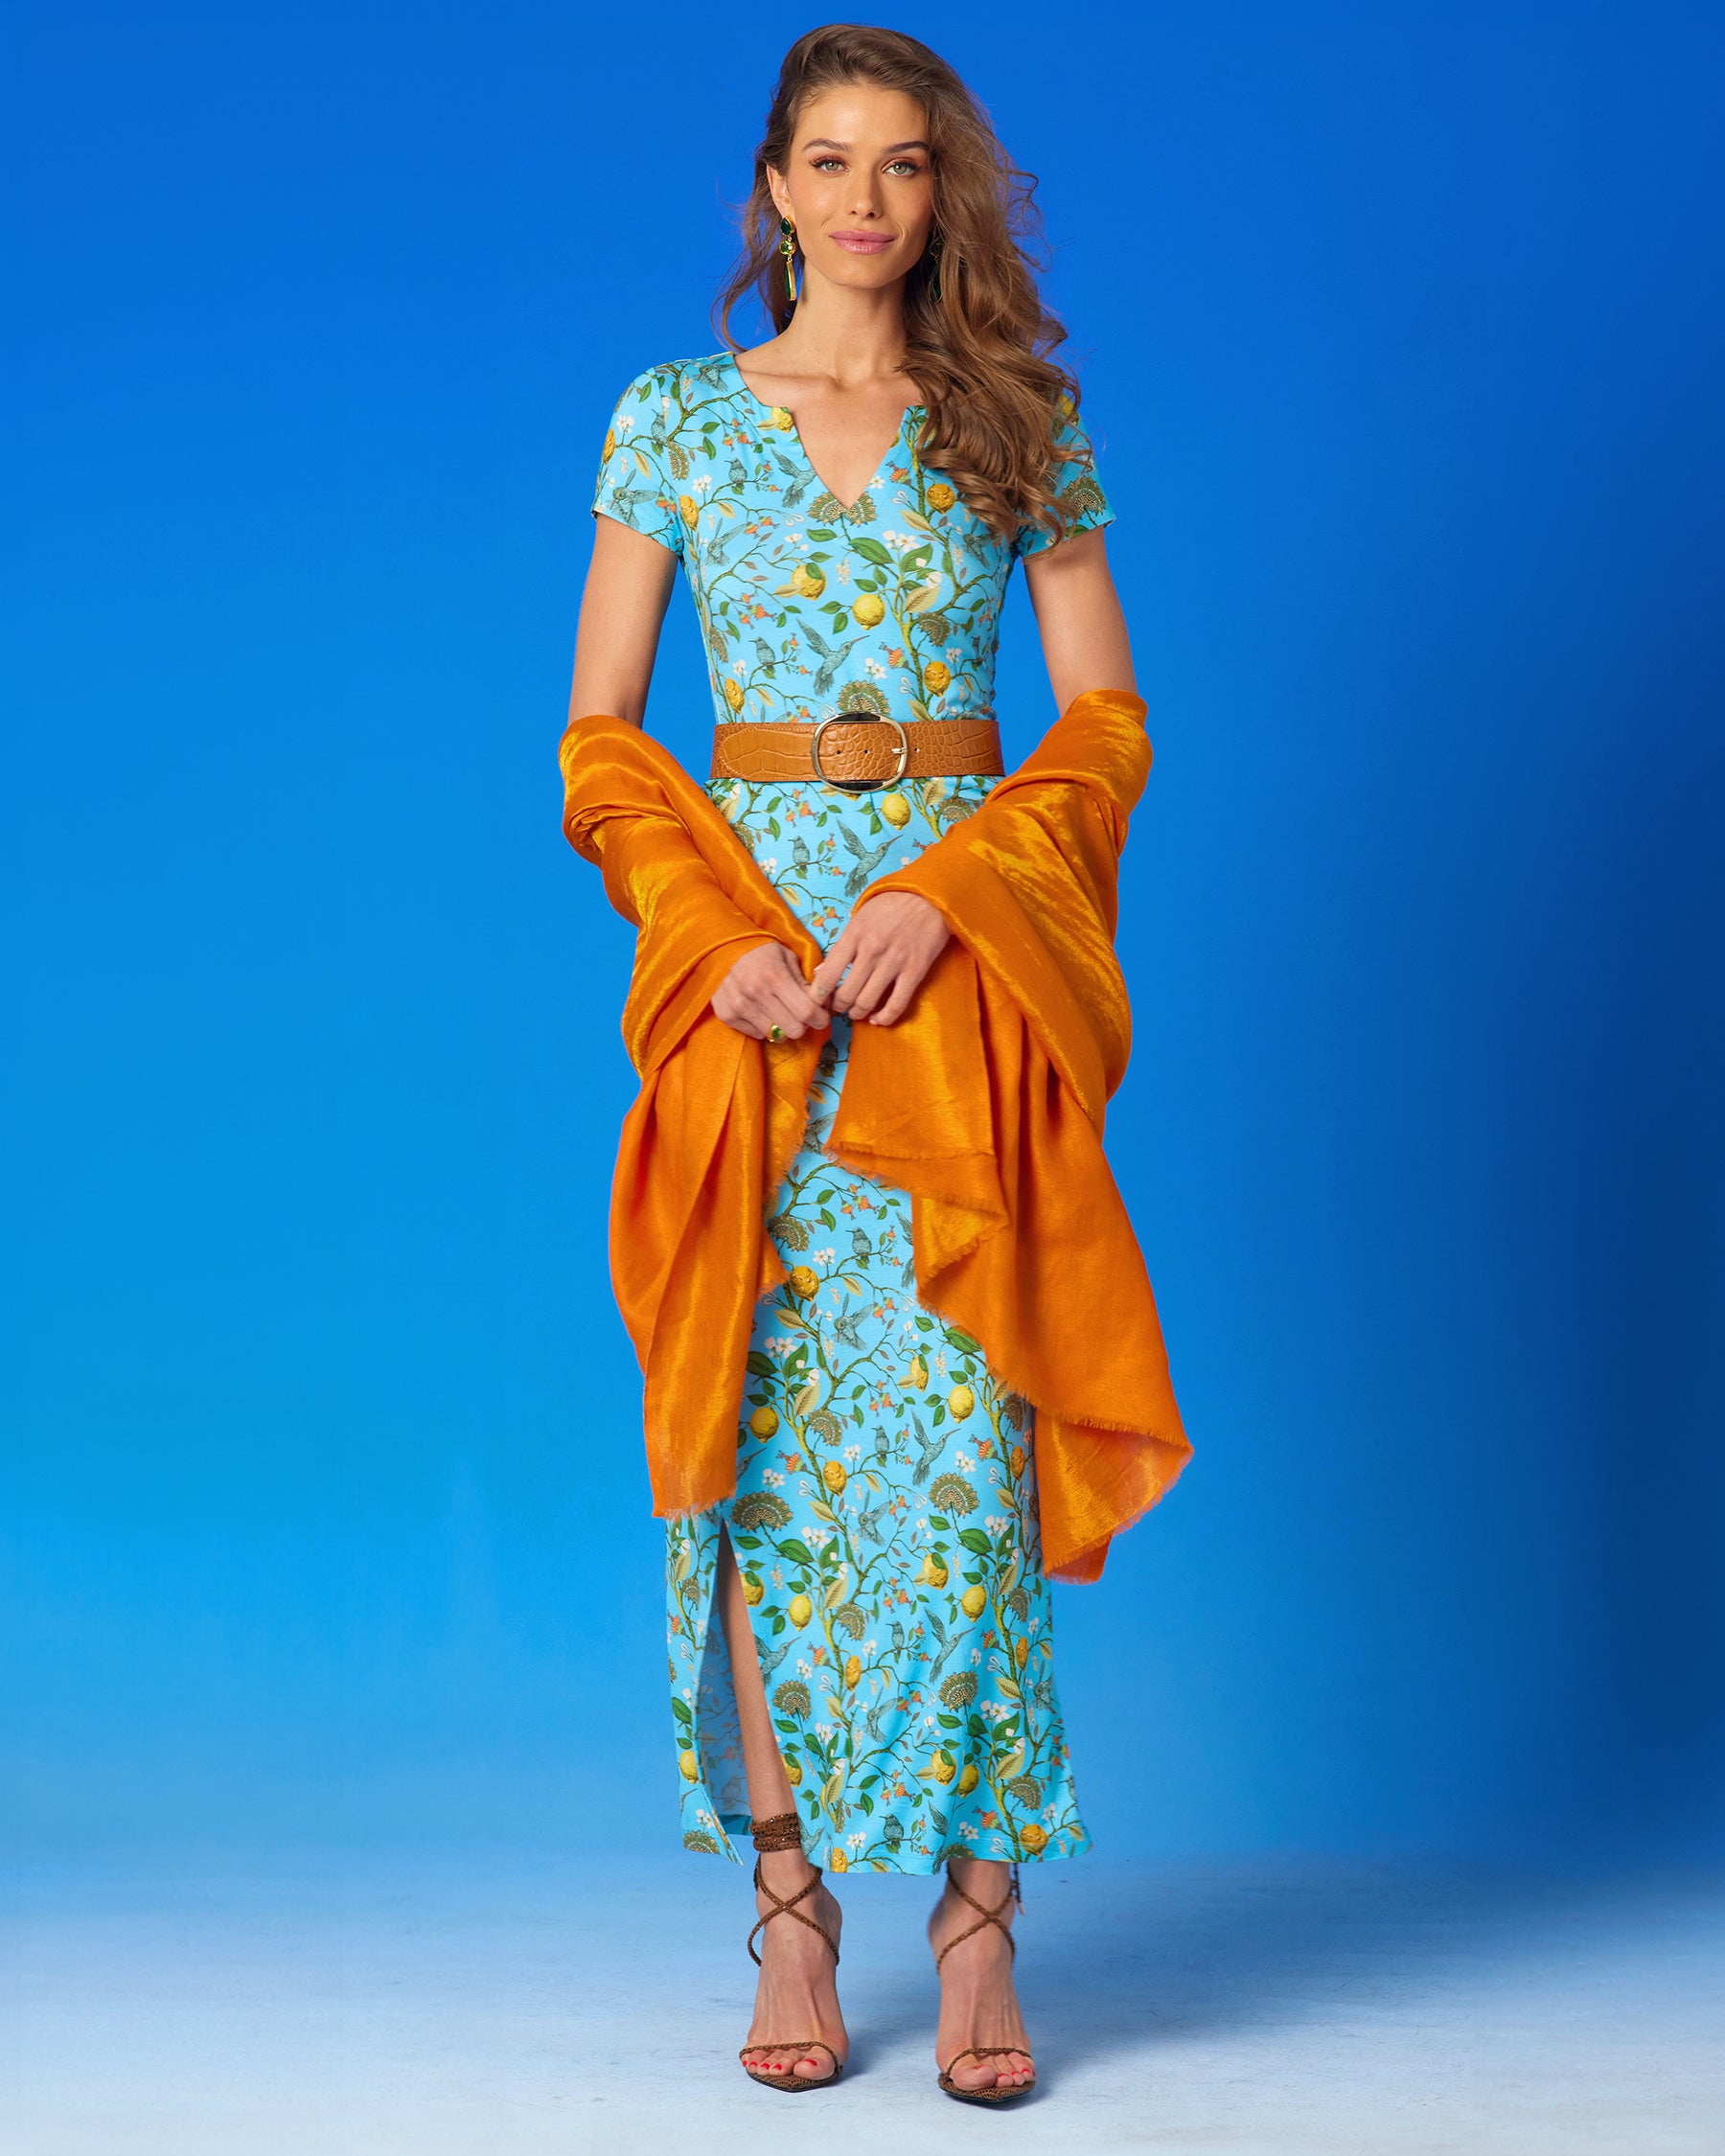 Flora Long Stretch Dress in Turquoise Hummingbird Print worn with the Josephine Pashmina Shawl-Full Length View